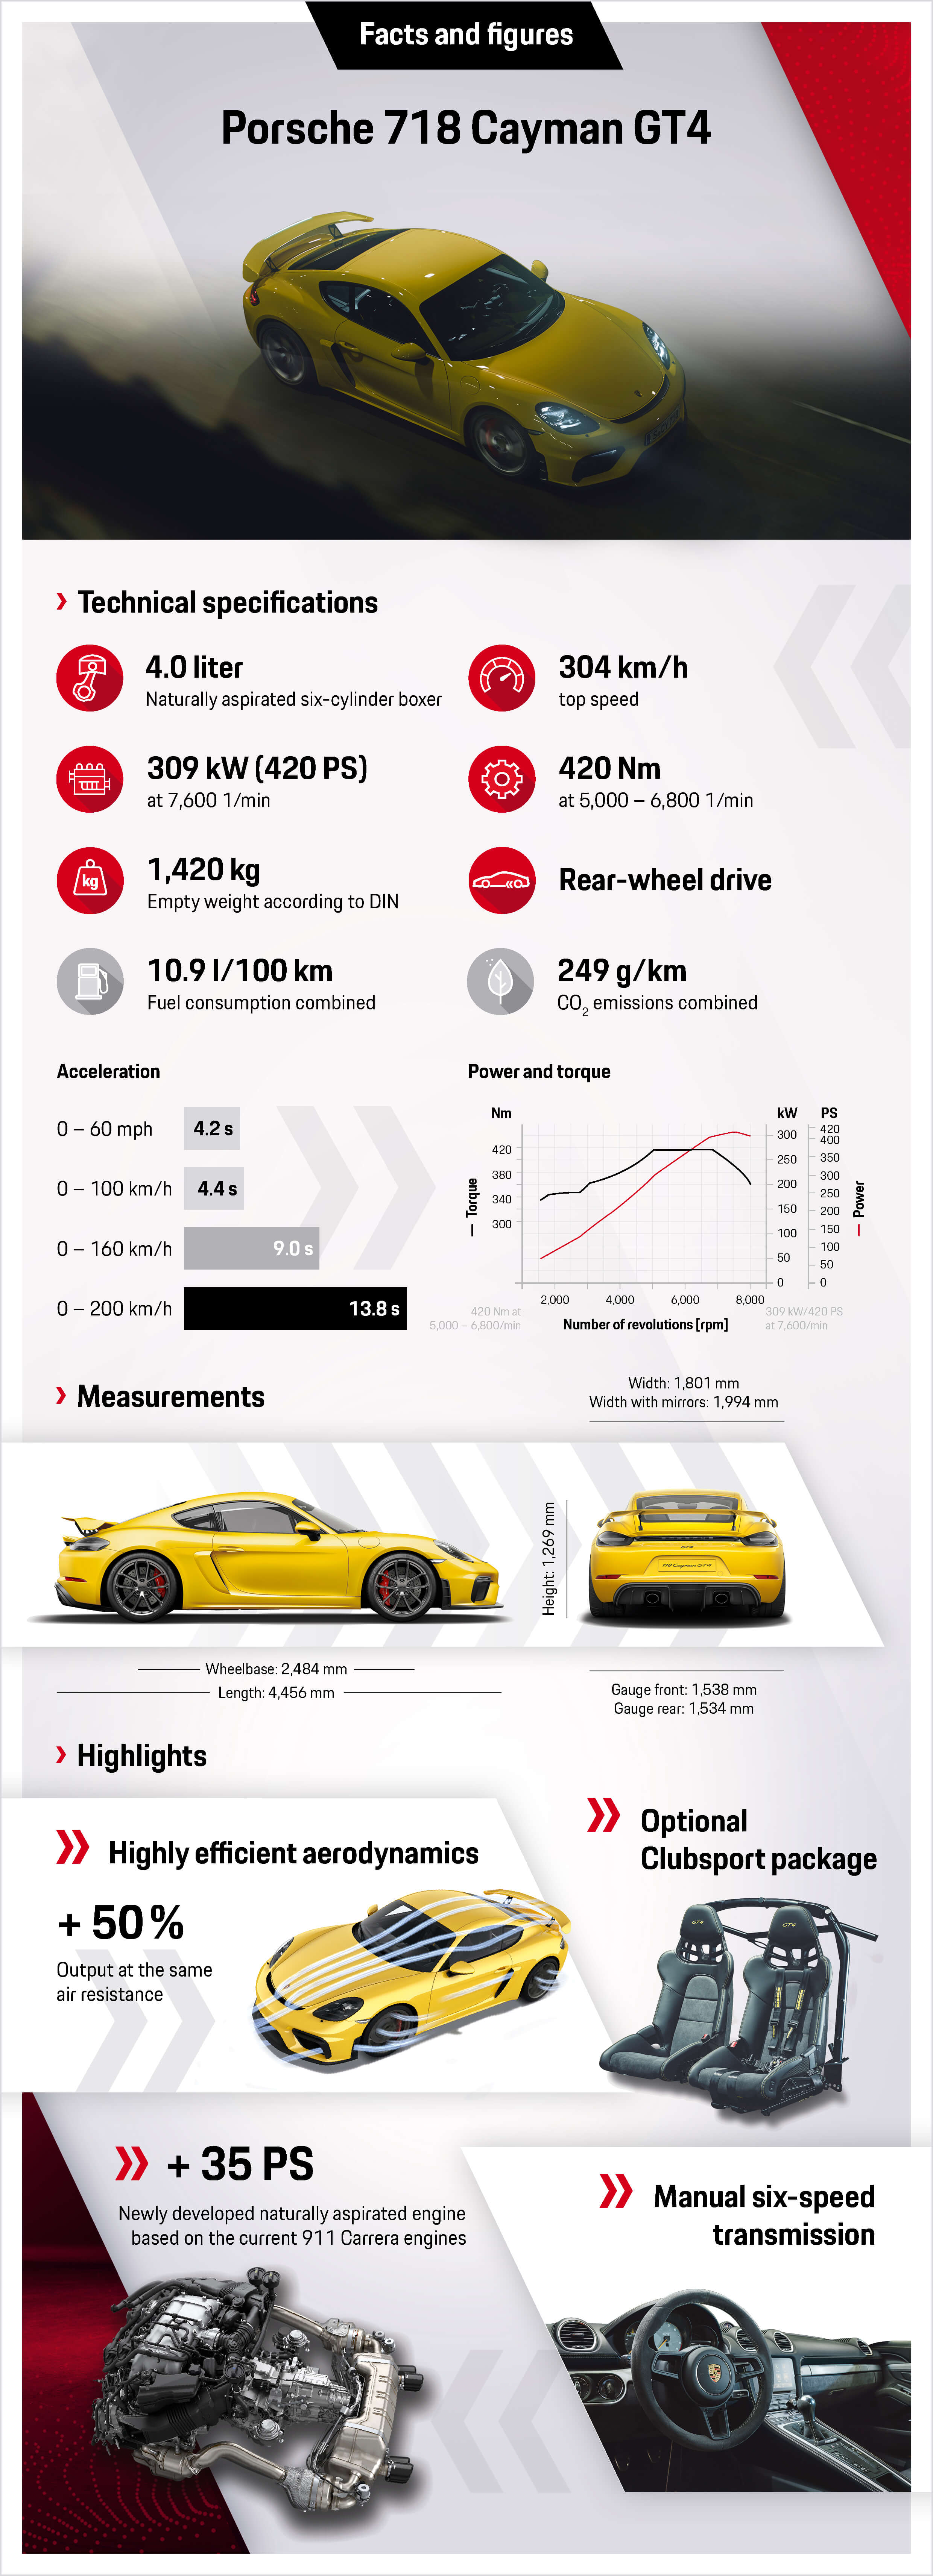 2019 Porsche 718 Cayman GT4 facts and figures infographic